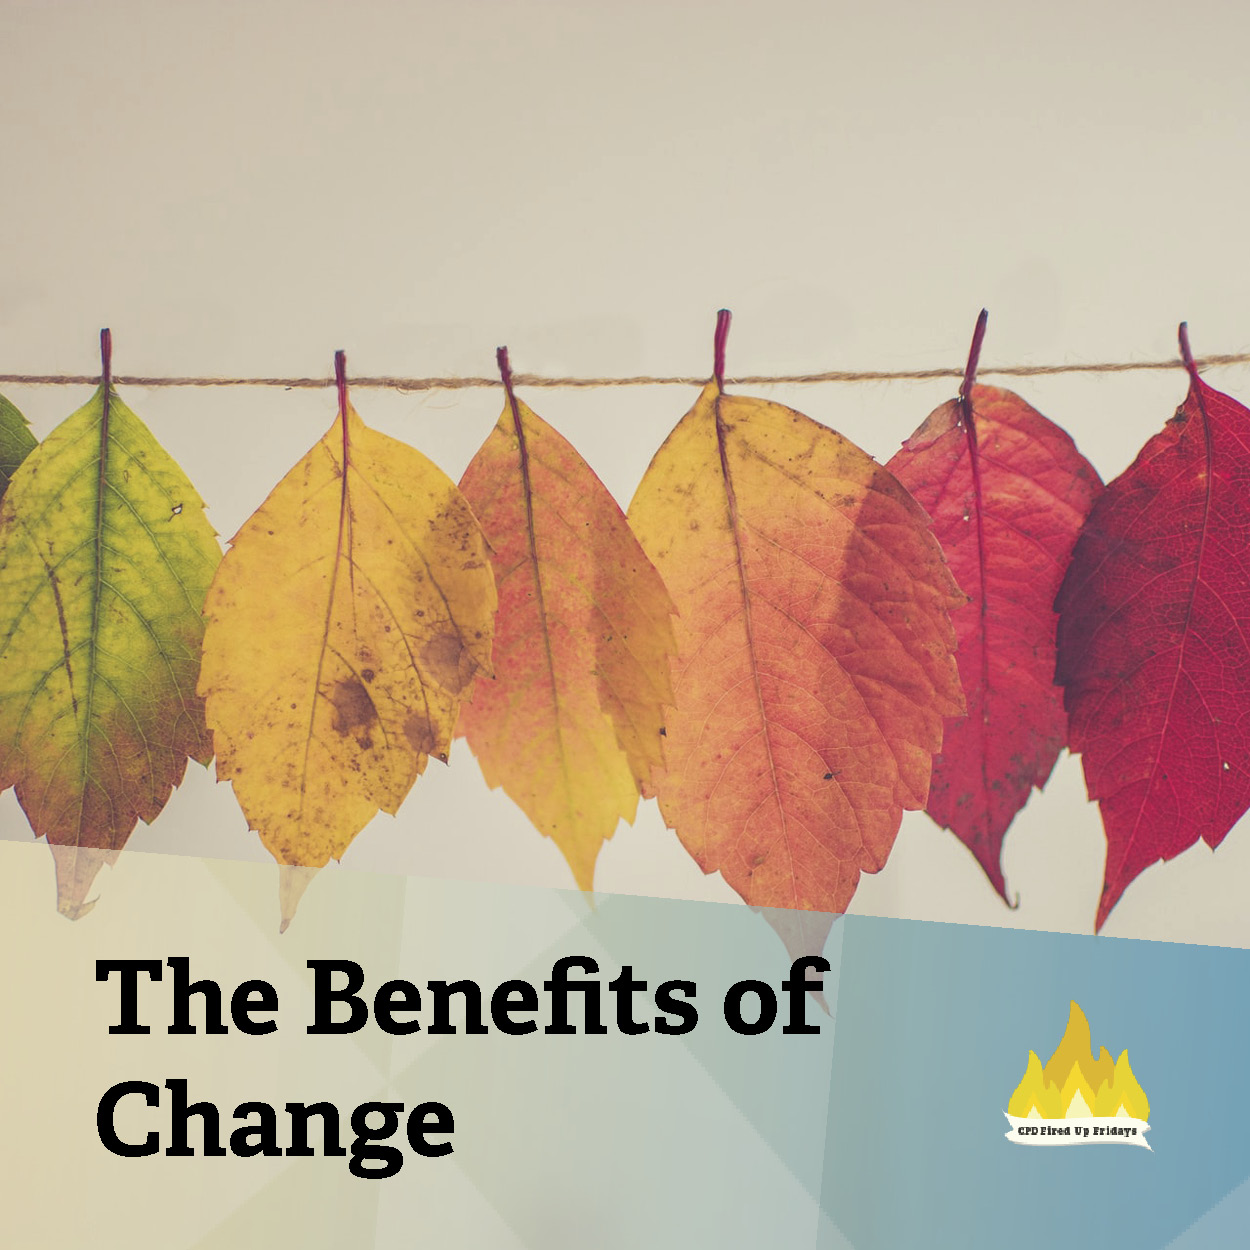 A series of leaves are displayed clipped on a line, showing how their color changes. The first leaf is green, with subsequent leaves in shades of yellow, orange, and finally a dark red. Underneath, text reads: 'The Benefits of Change.'